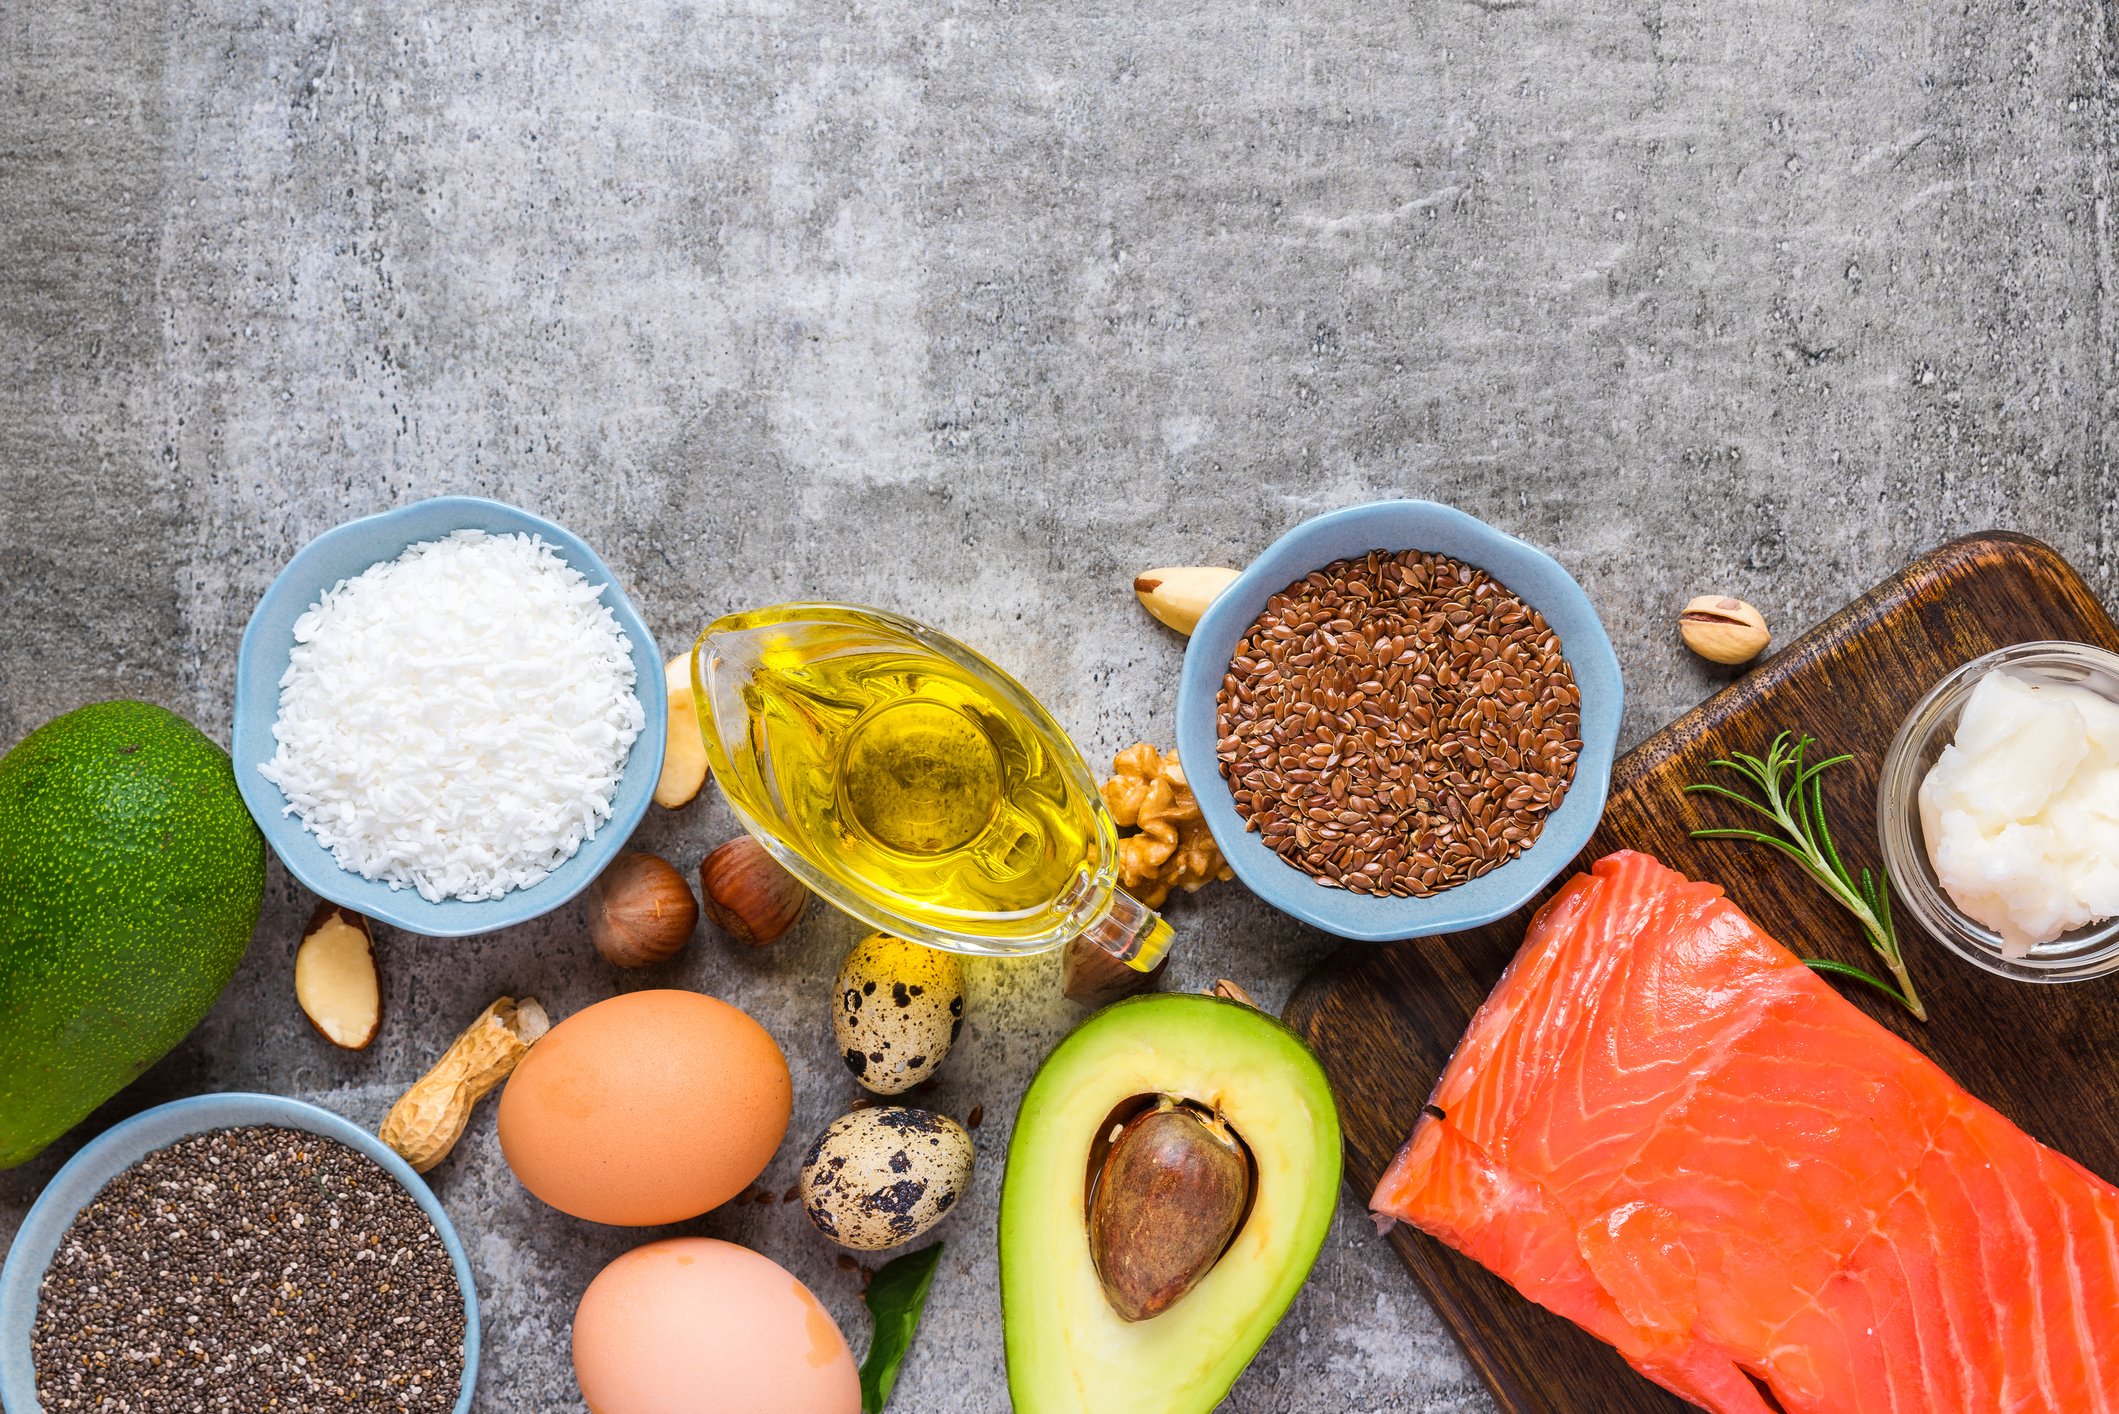 You probably knew that good nutrition can help you live a healthier life. But did you know food is a form of medicine? Getting the proper nutrition benefits your